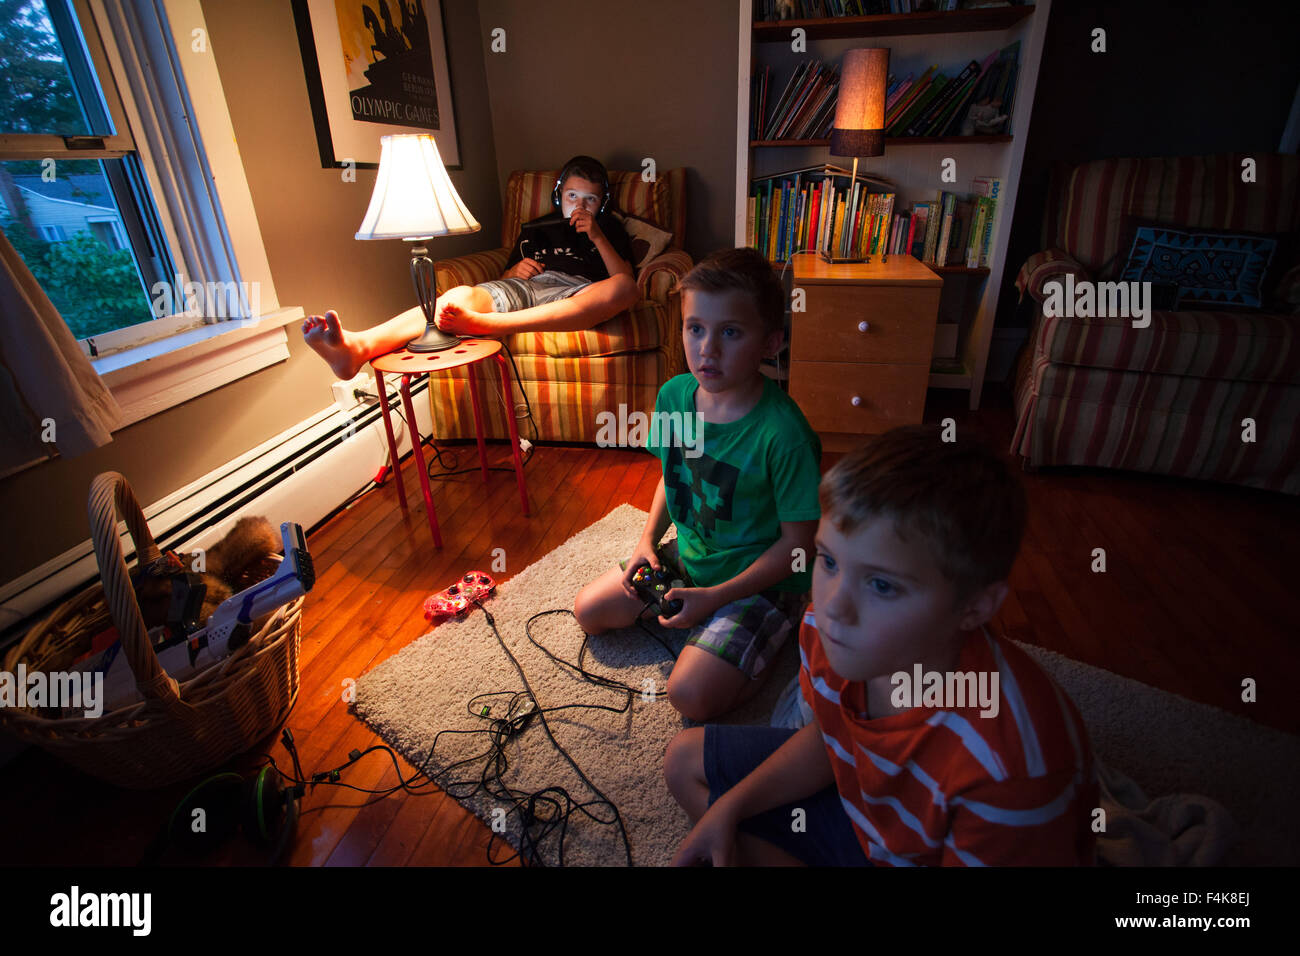 Young girl playing video games on computer after online school and  homework. Gamer using shooting action play for entertainment and fun with  keyboard and monitor. Child enjoying game Stock Photo - Alamy